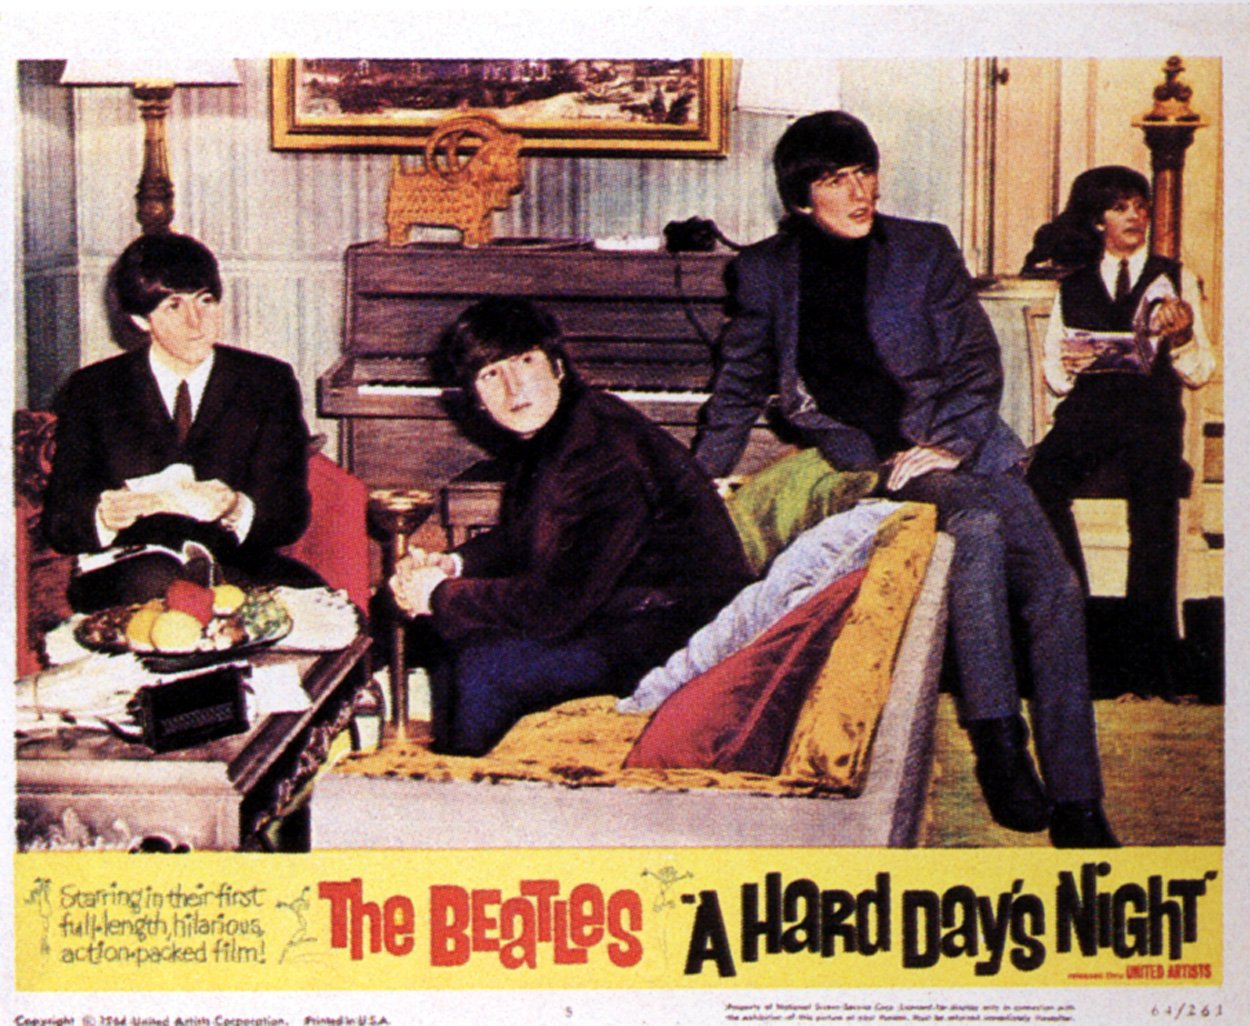 Paul McCartney, John Lennon, Ringo Starr, and George Harrison of the Beatles in 'A Hard Day's Night'